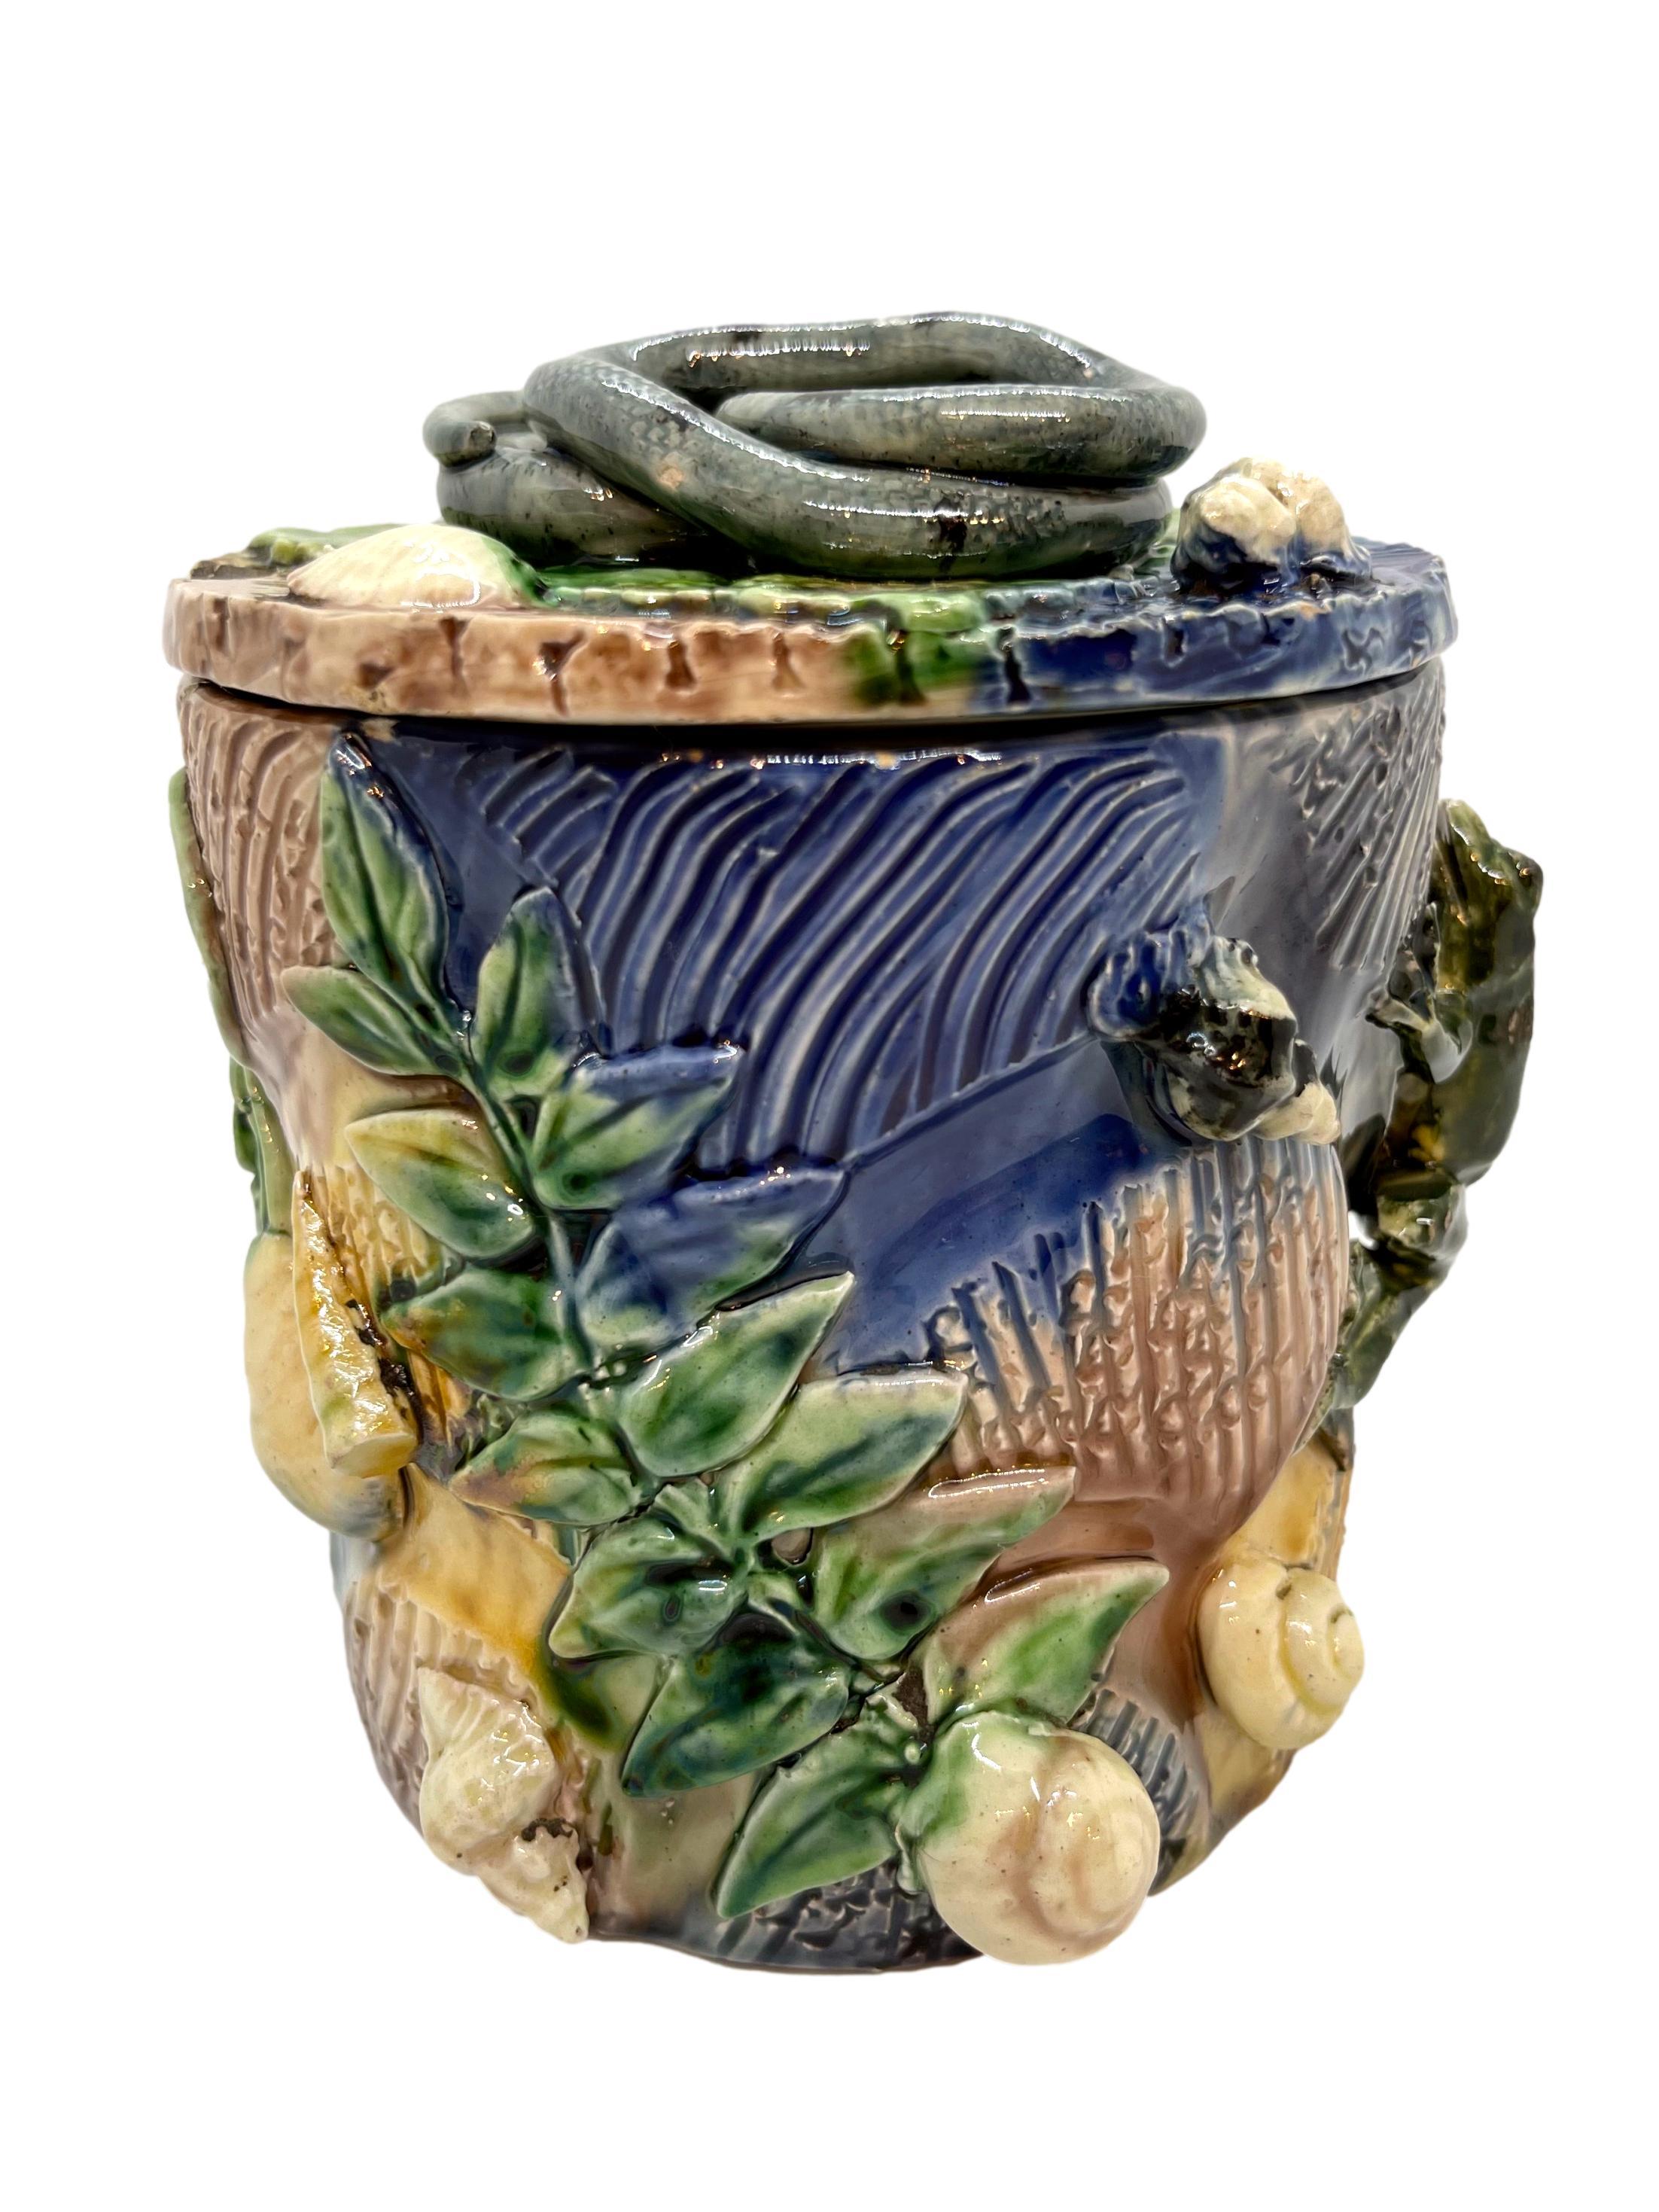 Molded Thomas Sergent Majolica Palissy Ware Humidor with Coiled Snake on Lid, ca, 1880 